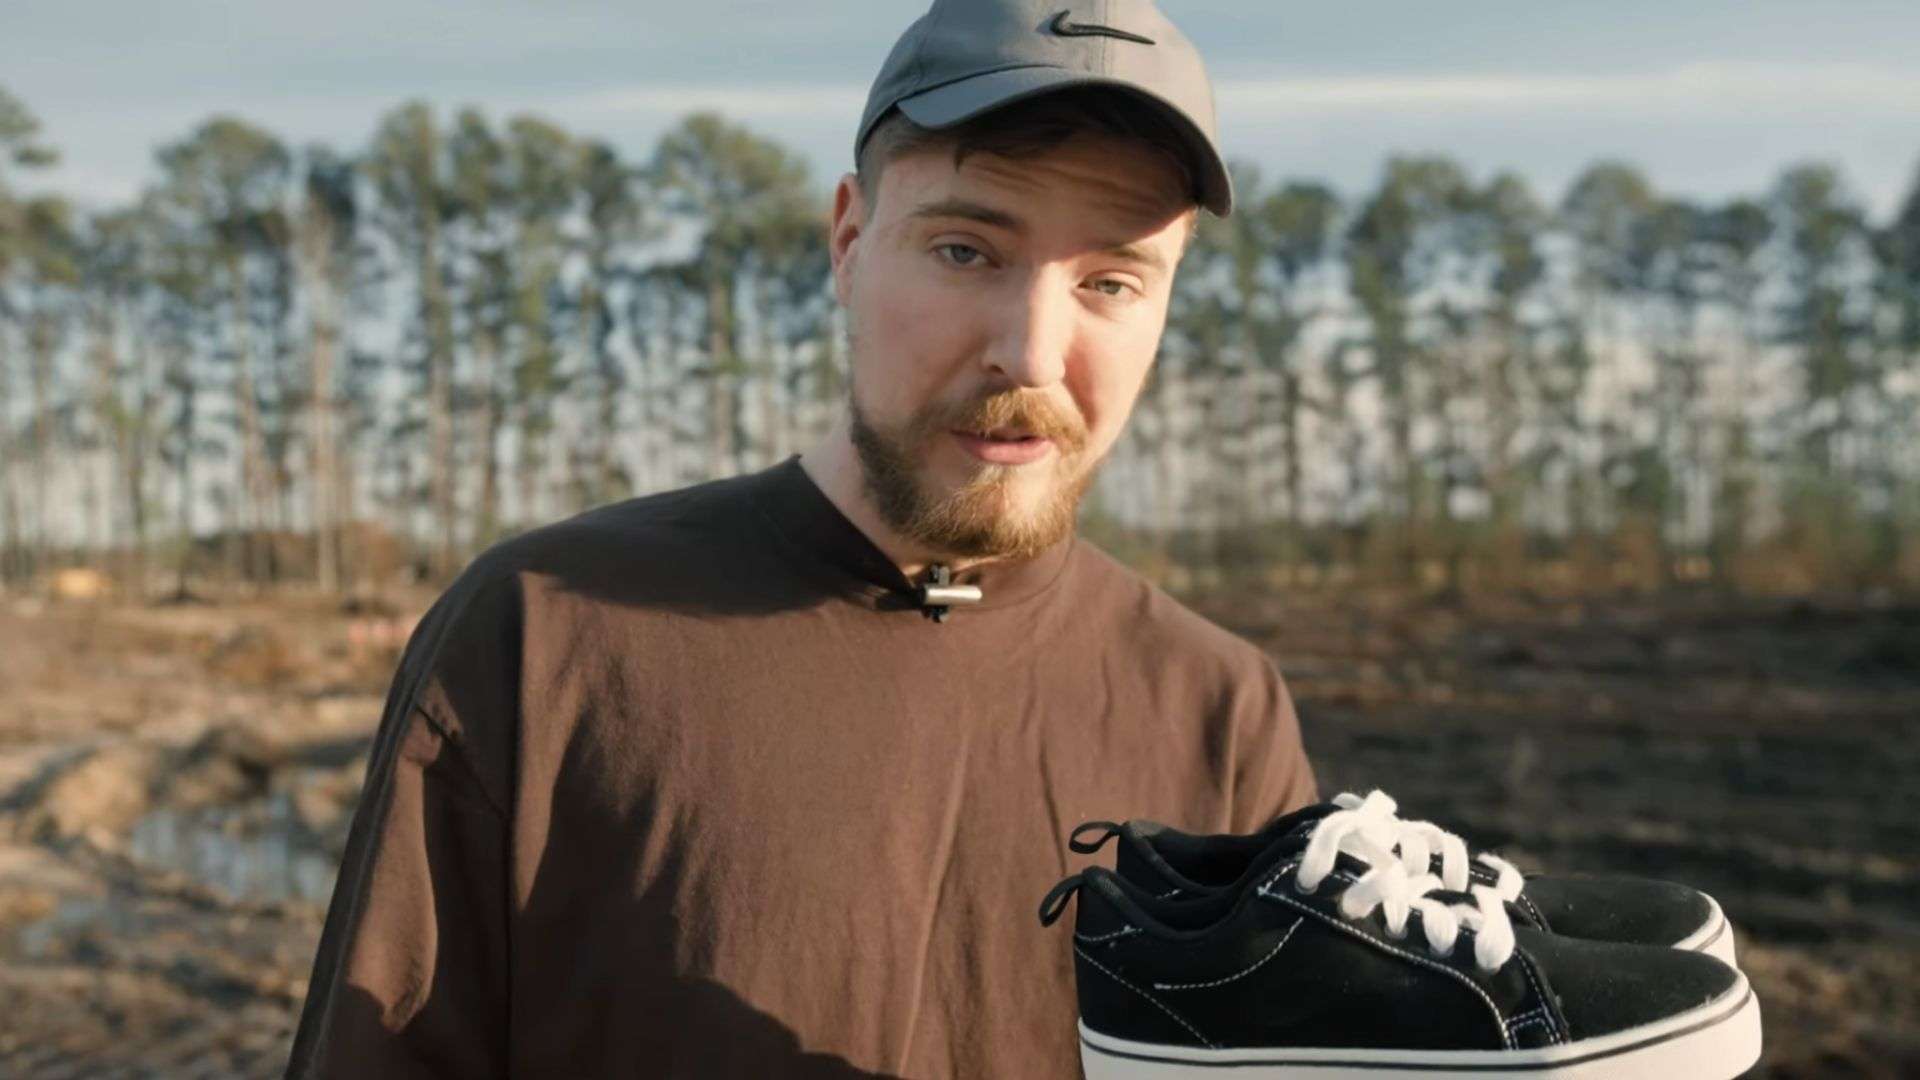 MrBeast in black shirt and gray hat holding black pair of shoes and talking to camera